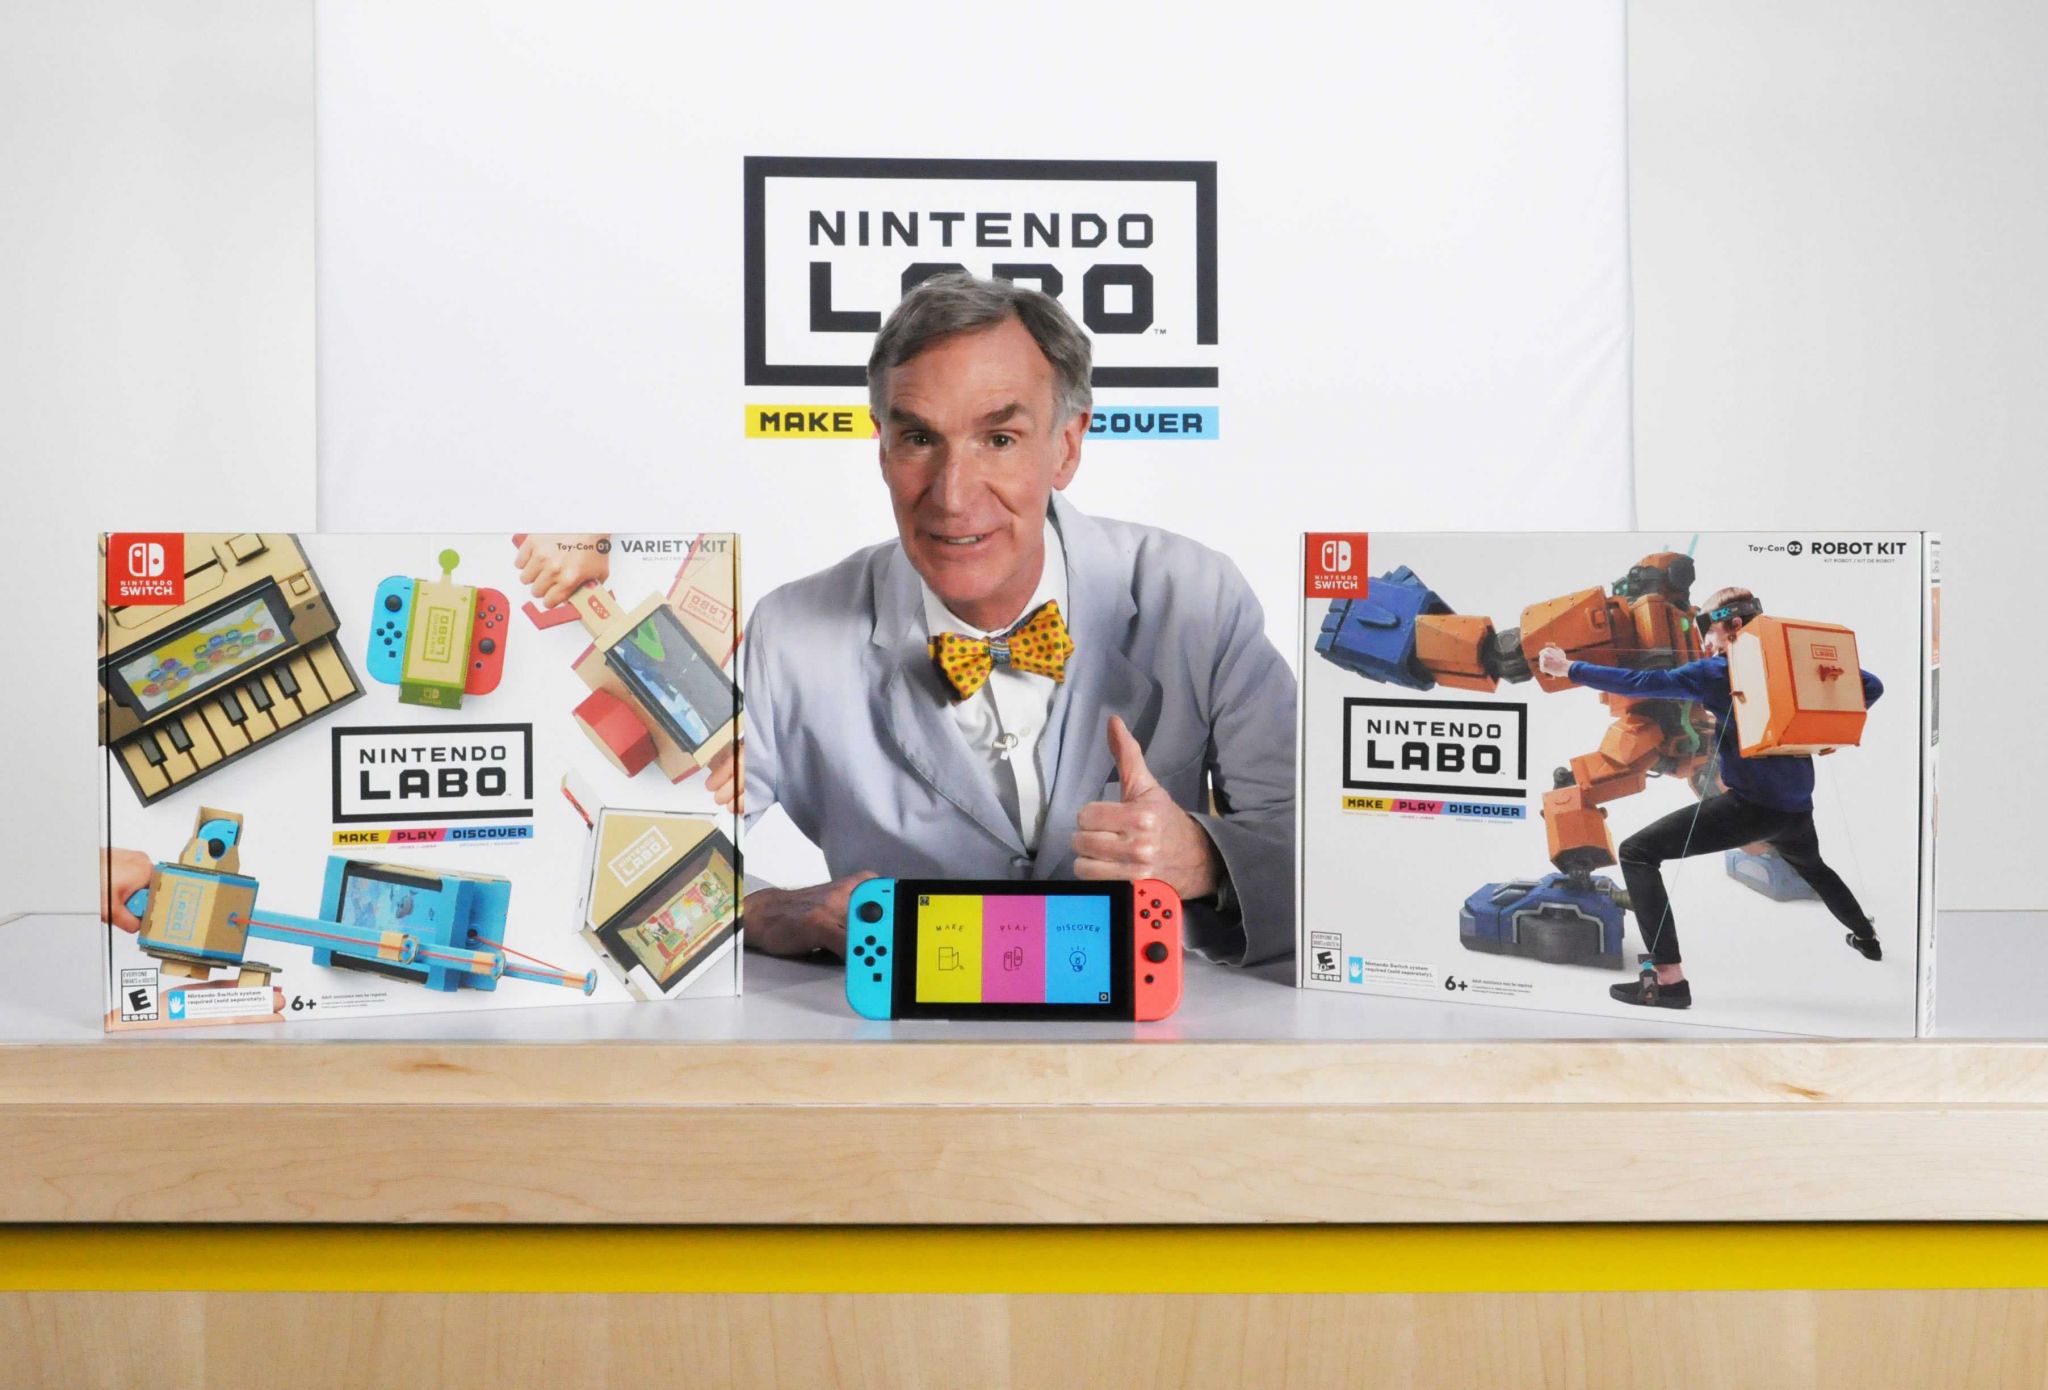 Bill Nye Heat Video Worksheet Answers and Nintendo Labo Launches today Watch Bill Nye Mess Around with It